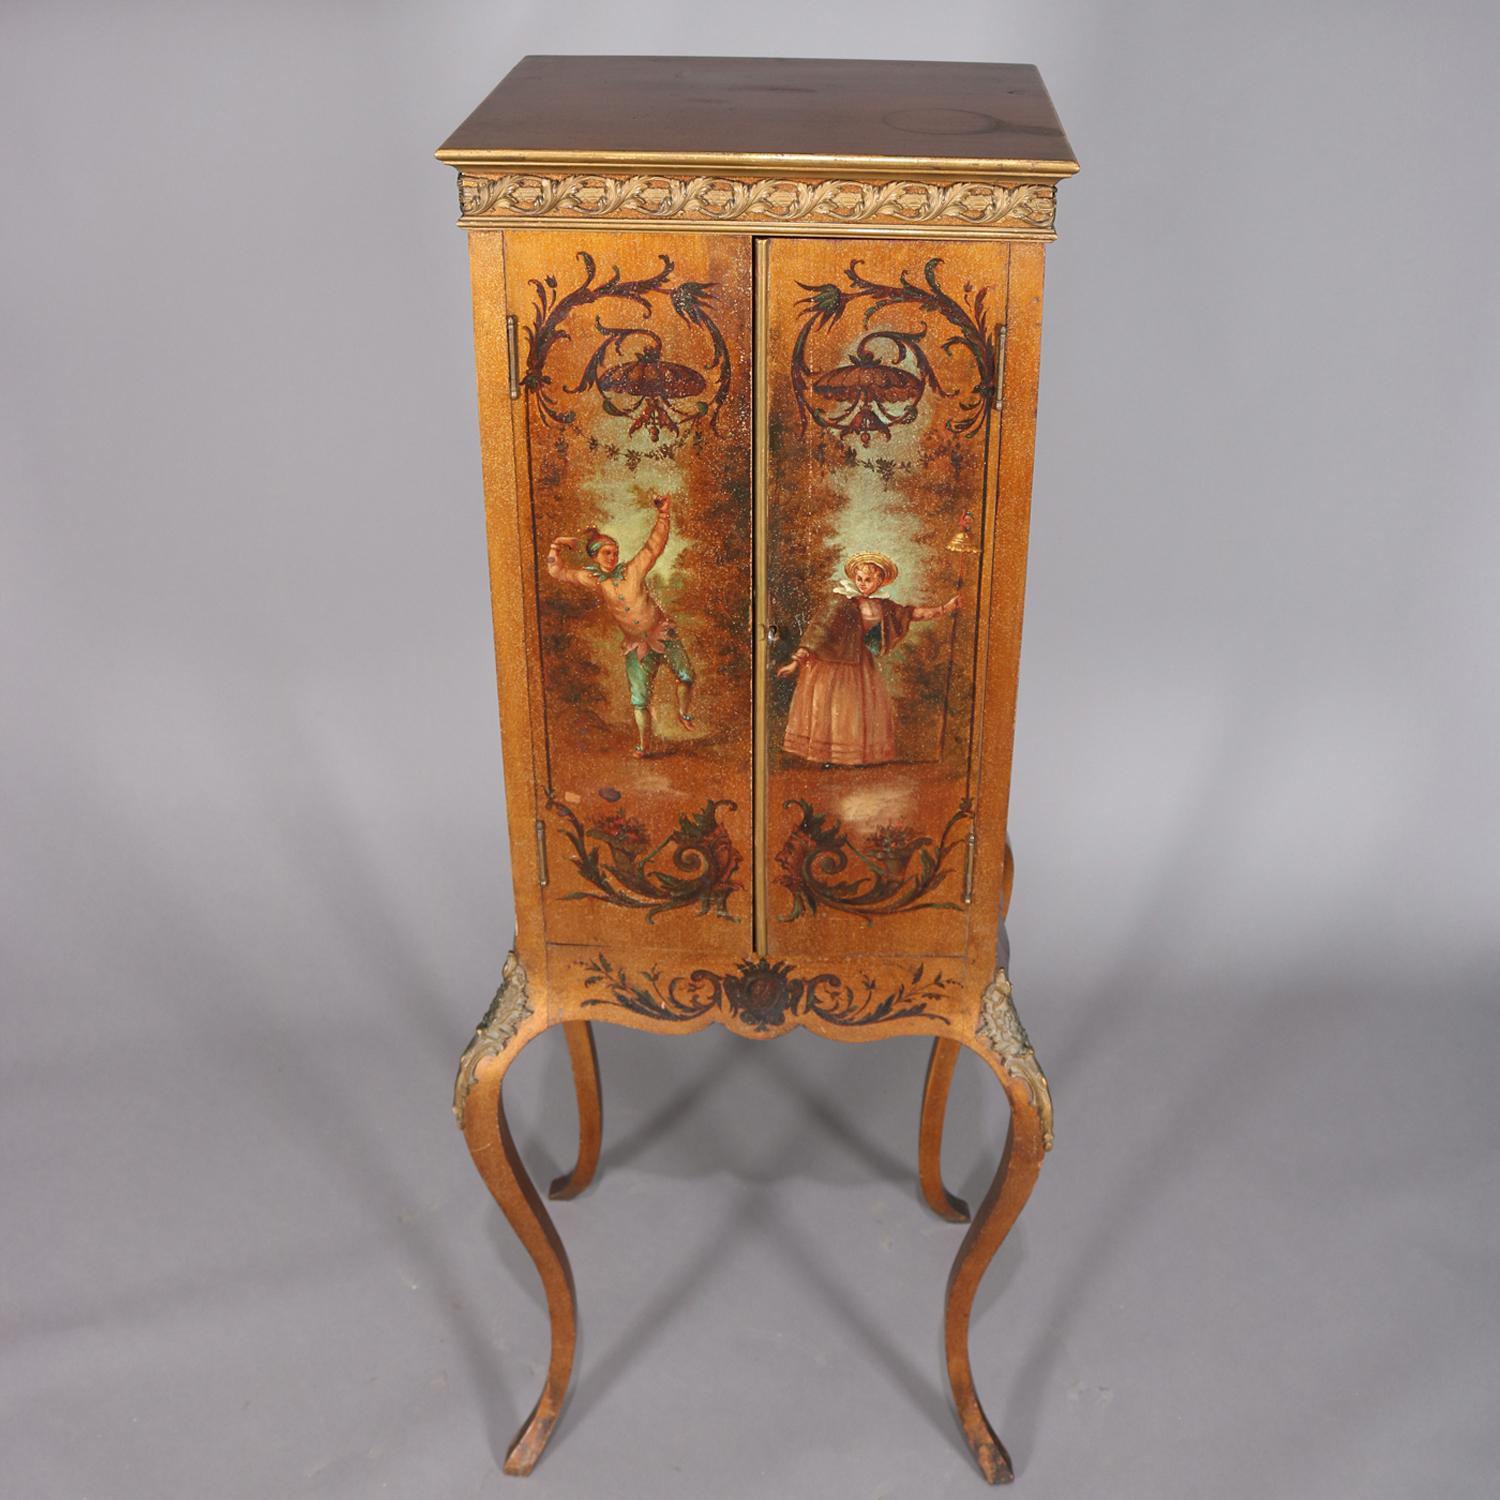 Antique French petite cabinet features Vernis Martin School courting and landscape scenes on giltwood with cast foliate attachments with double blind doors opening to shelved interior and seated on cabriole legs, circa 1890

Measures: 57.25